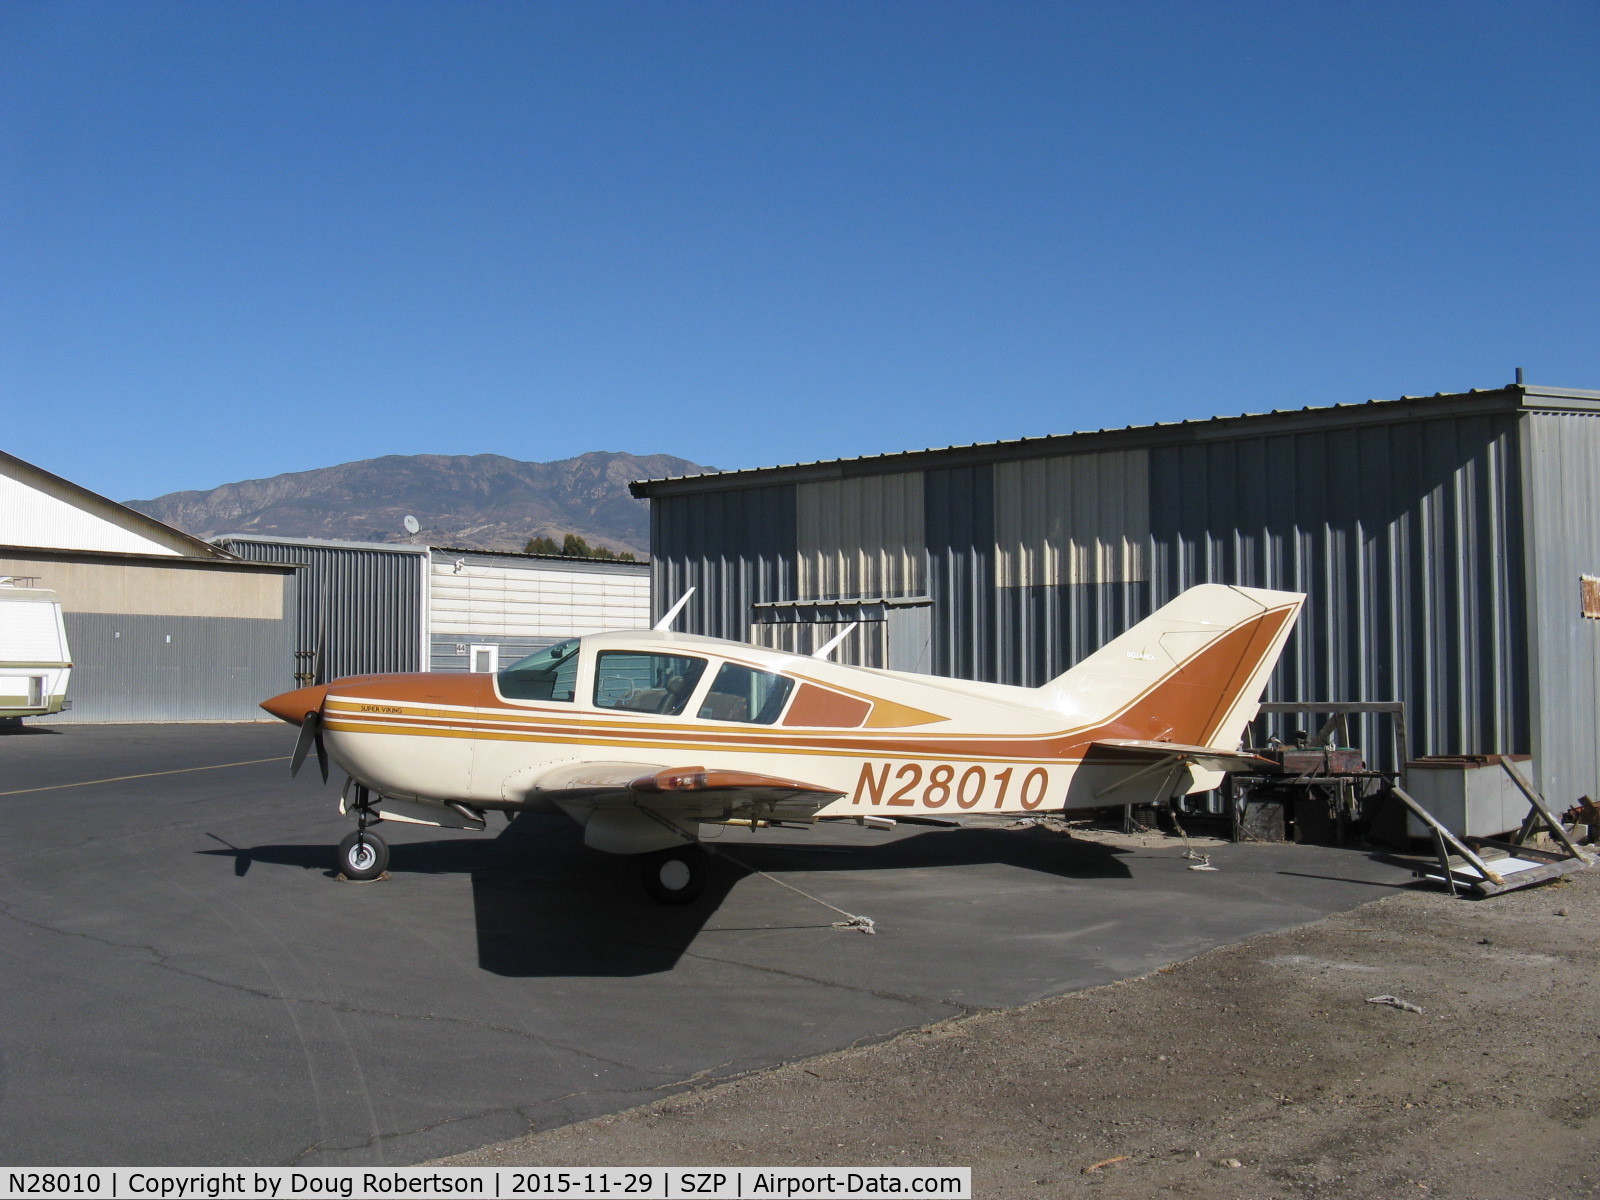 N28010, 1978 Bellanca 17-30A Viking C/N 79-30908, 1978 Bellanca 17-30A VIKING, Continental IO-520 285/300 Hp. The Super Viking model name started with the 1969 17-31A with Lycoming engine; this aircraft is a 17-30A Viking.